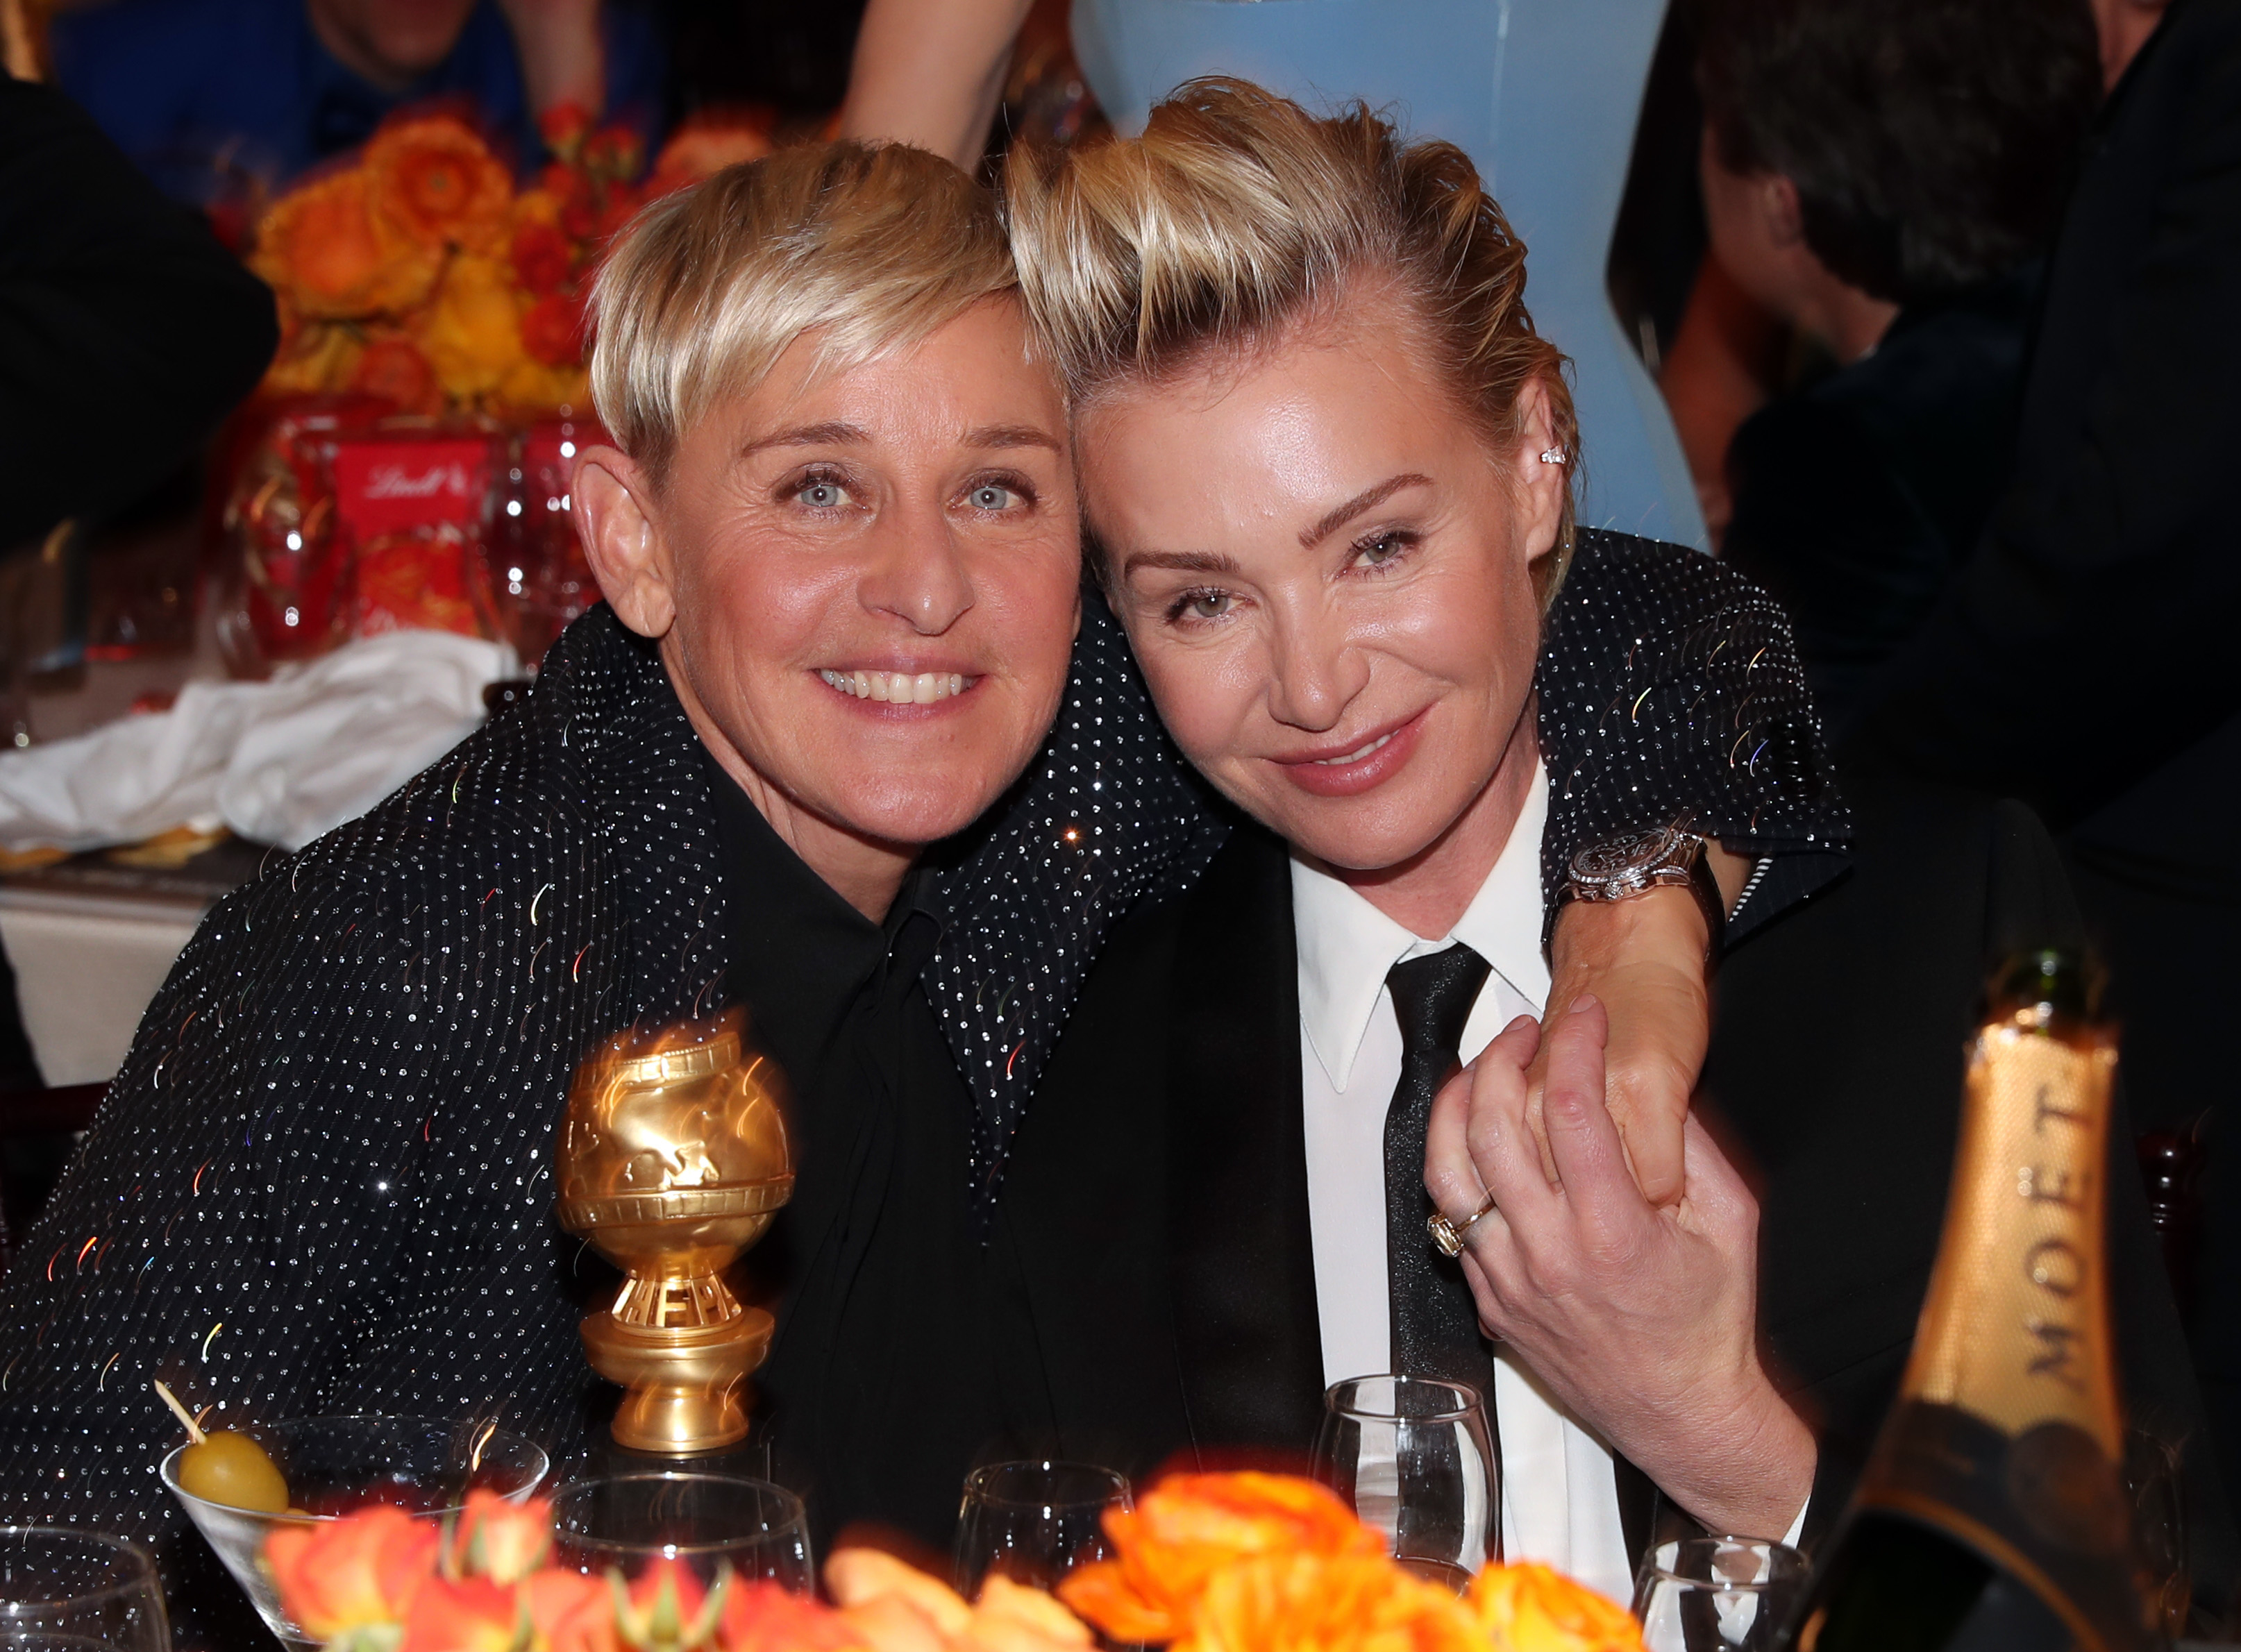 Ellen DeGeneres and Portia de Rossi smiling close together at an event, both dressed in stylish outfits